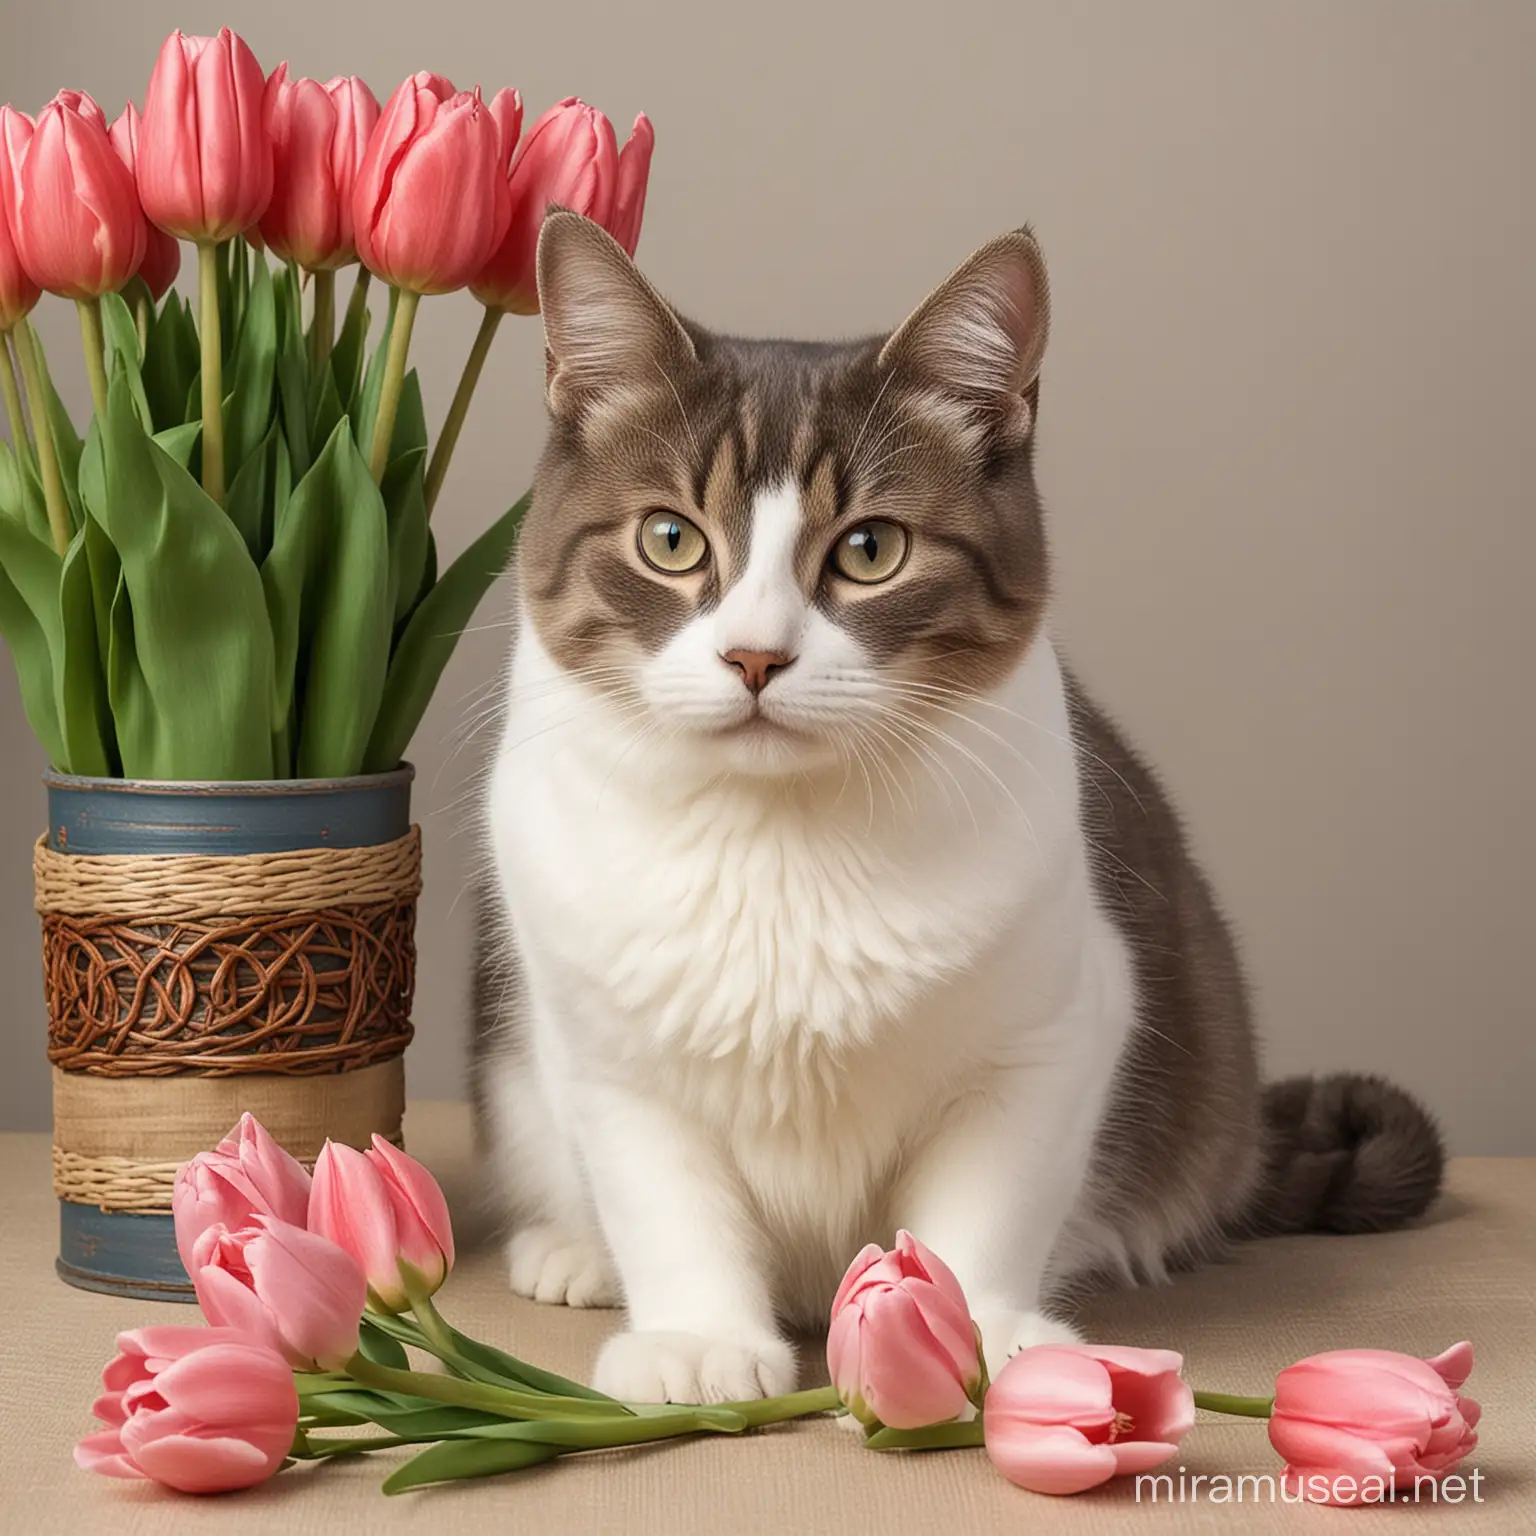 Adorable Cat Surrounded by Vibrant Tulips